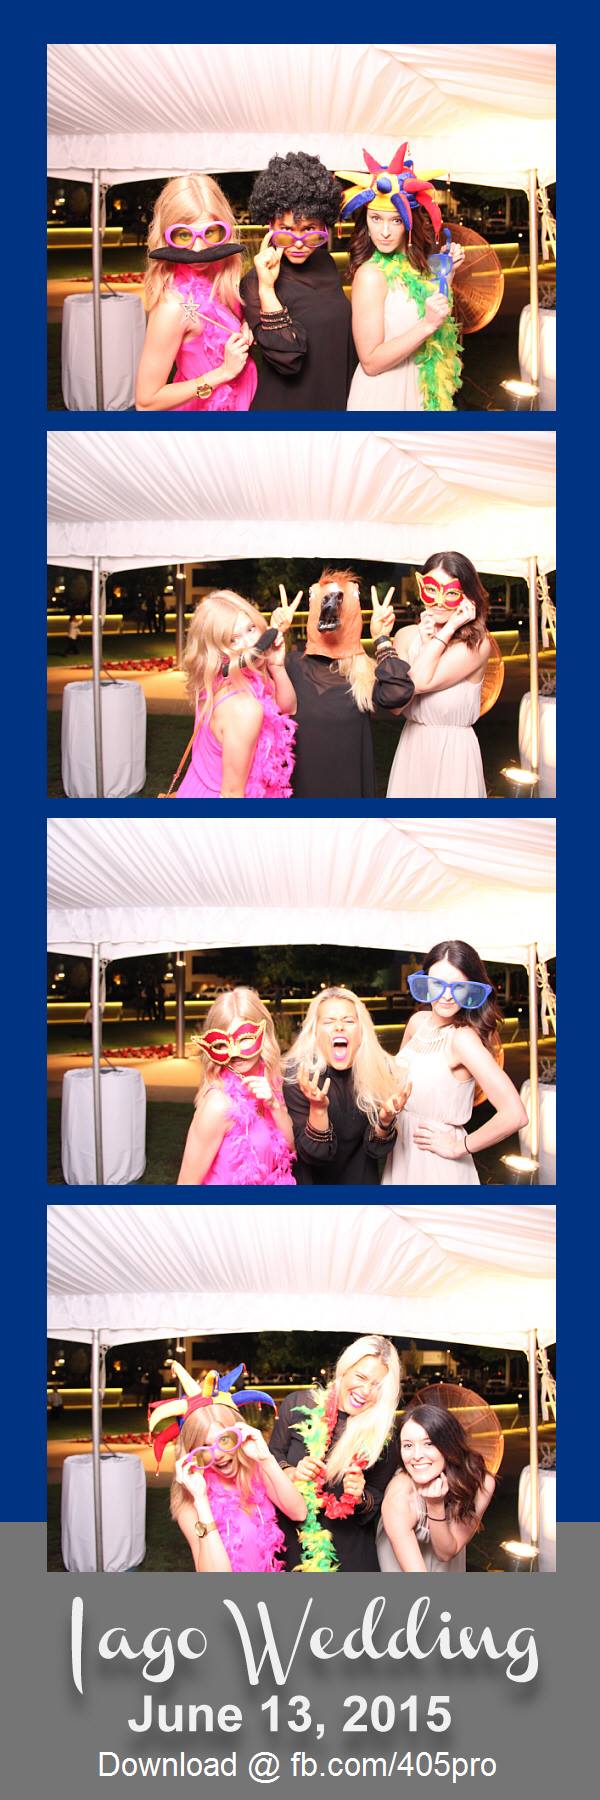 Oklahoma Moore Photo Booth Rentals Civic Center Hall Of Mirrors